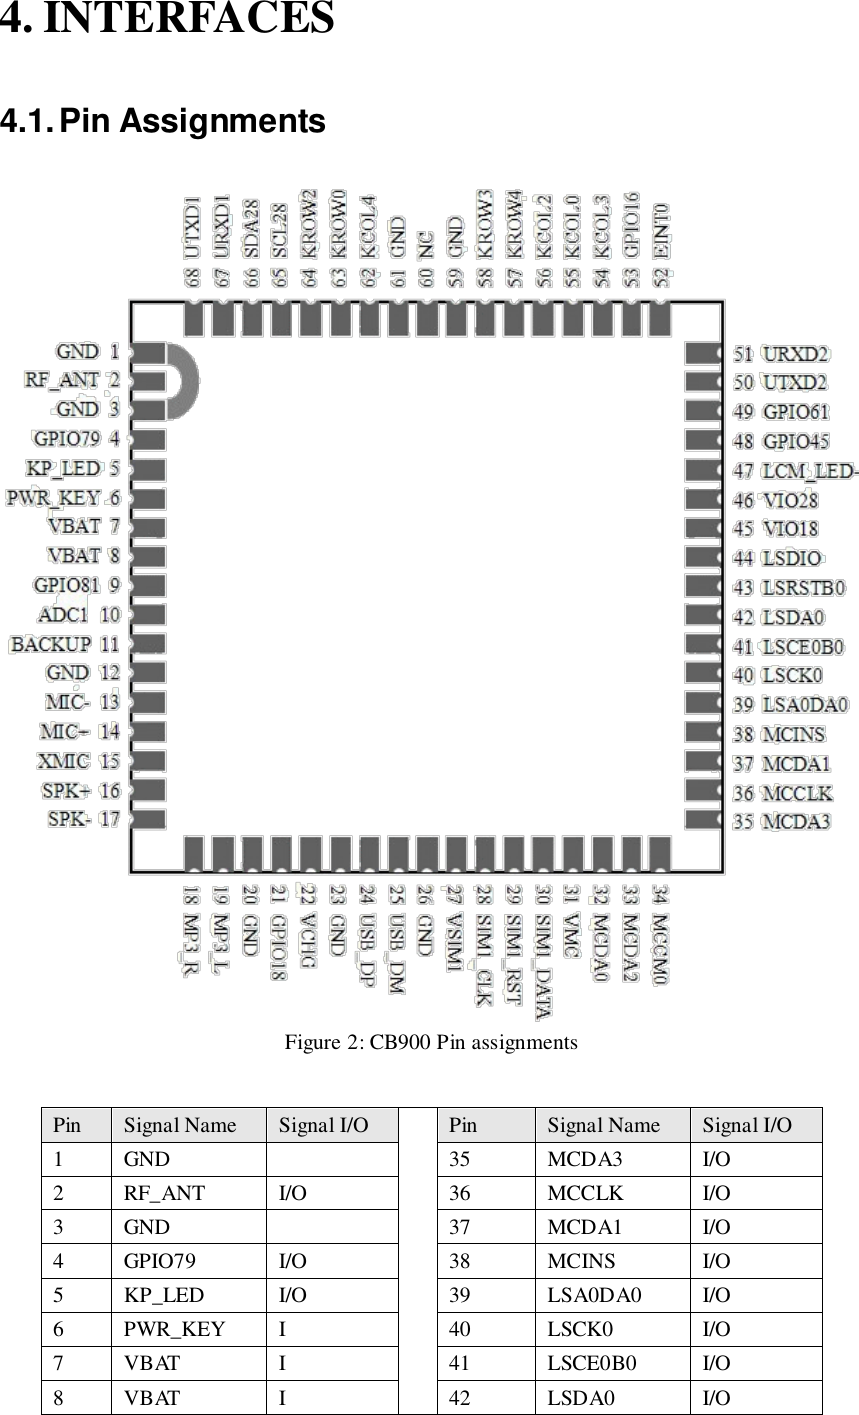 4. INTERFACES 4.1. Pin Assignments  Figure 2: CB900 Pin assignments  Pin Signal Name Signal I/O  Pin Signal Name Signal I/O 1 GND  35 MCDA3 I/O 2 RF_ANT I/O 36 MCCLK I/O 3 GND  37 MCDA1 I/O 4 GPIO79 I/O 38 MCINS I/O 5 KP_LED I/O 39 LSA0DA0 I/O 6 PWR_KEY I 40 LSCK0 I/O 7 VBAT I 41 LSCE0B0 I/O 8 VBAT I 42 LSDA0 I/O 